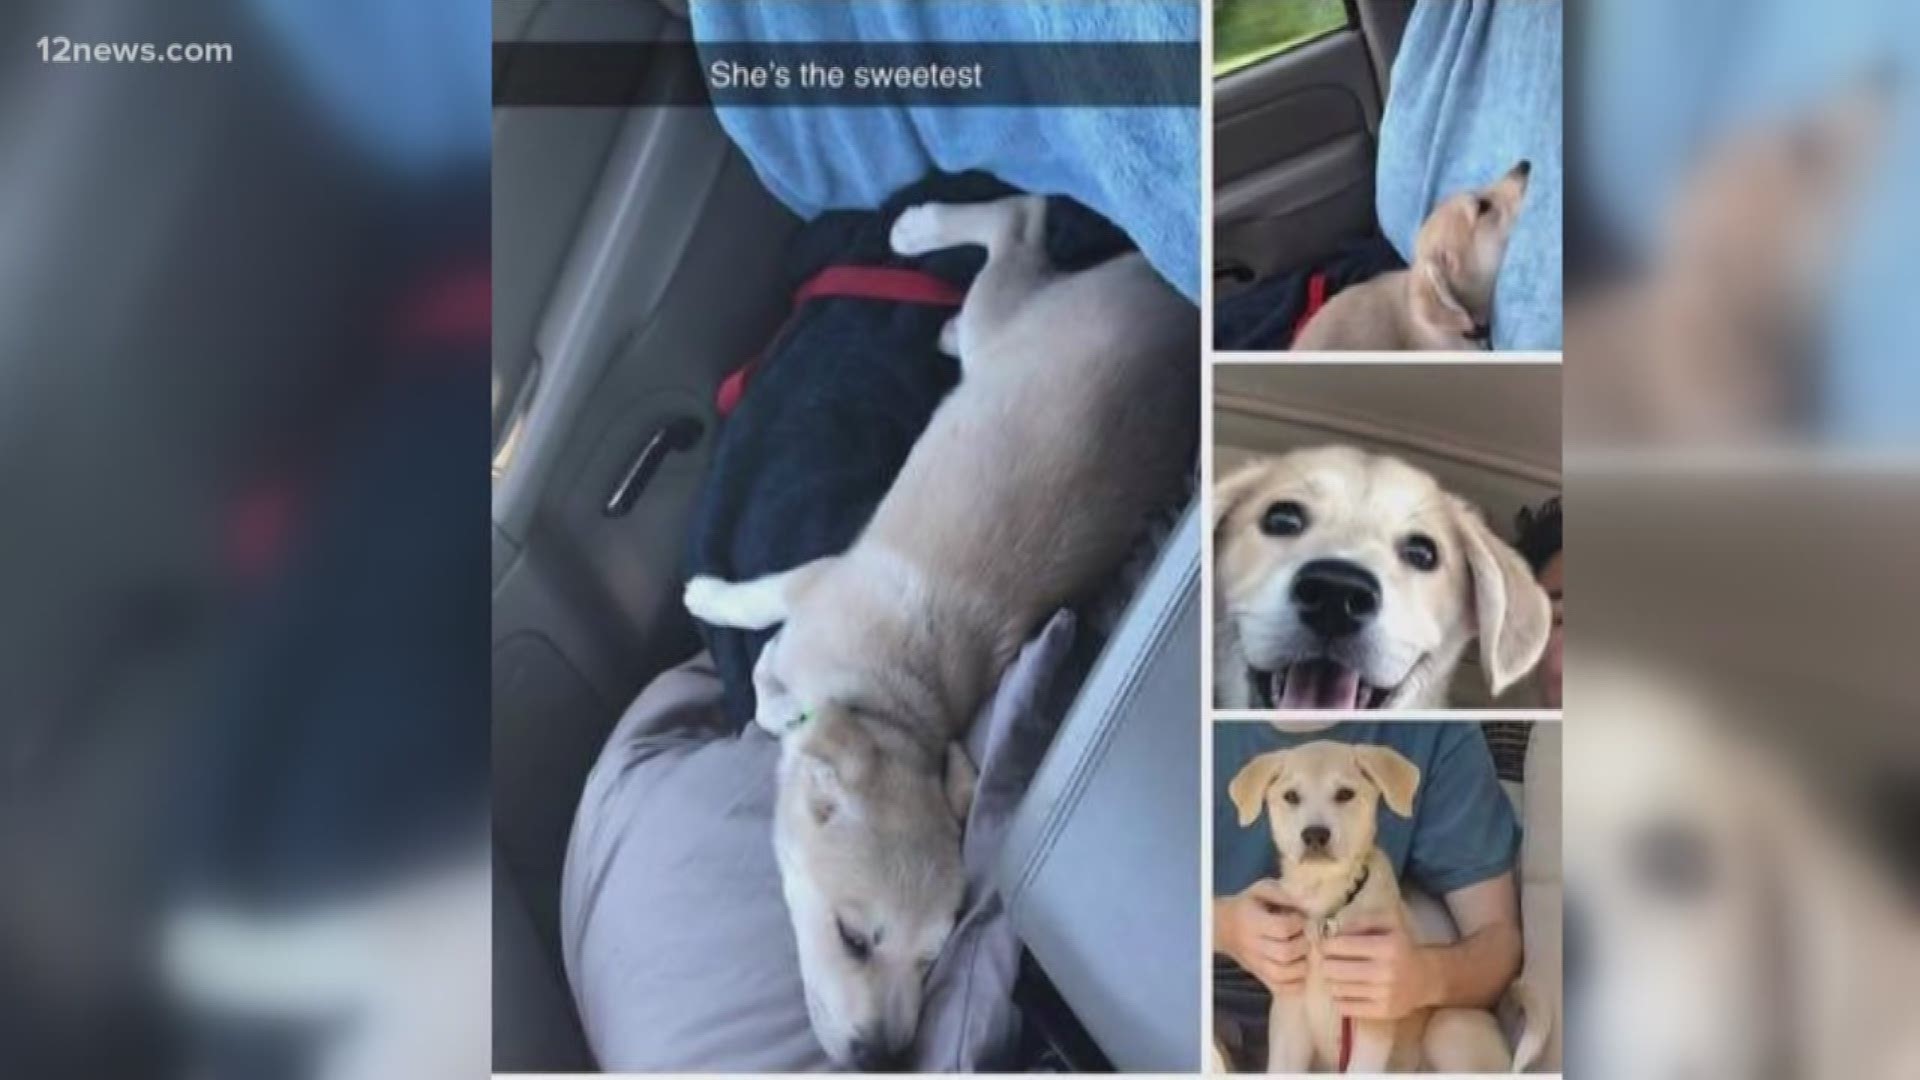 Bella the dog was lost after a crash near Flagstaff, but has now been found and is recovering at a local vet.